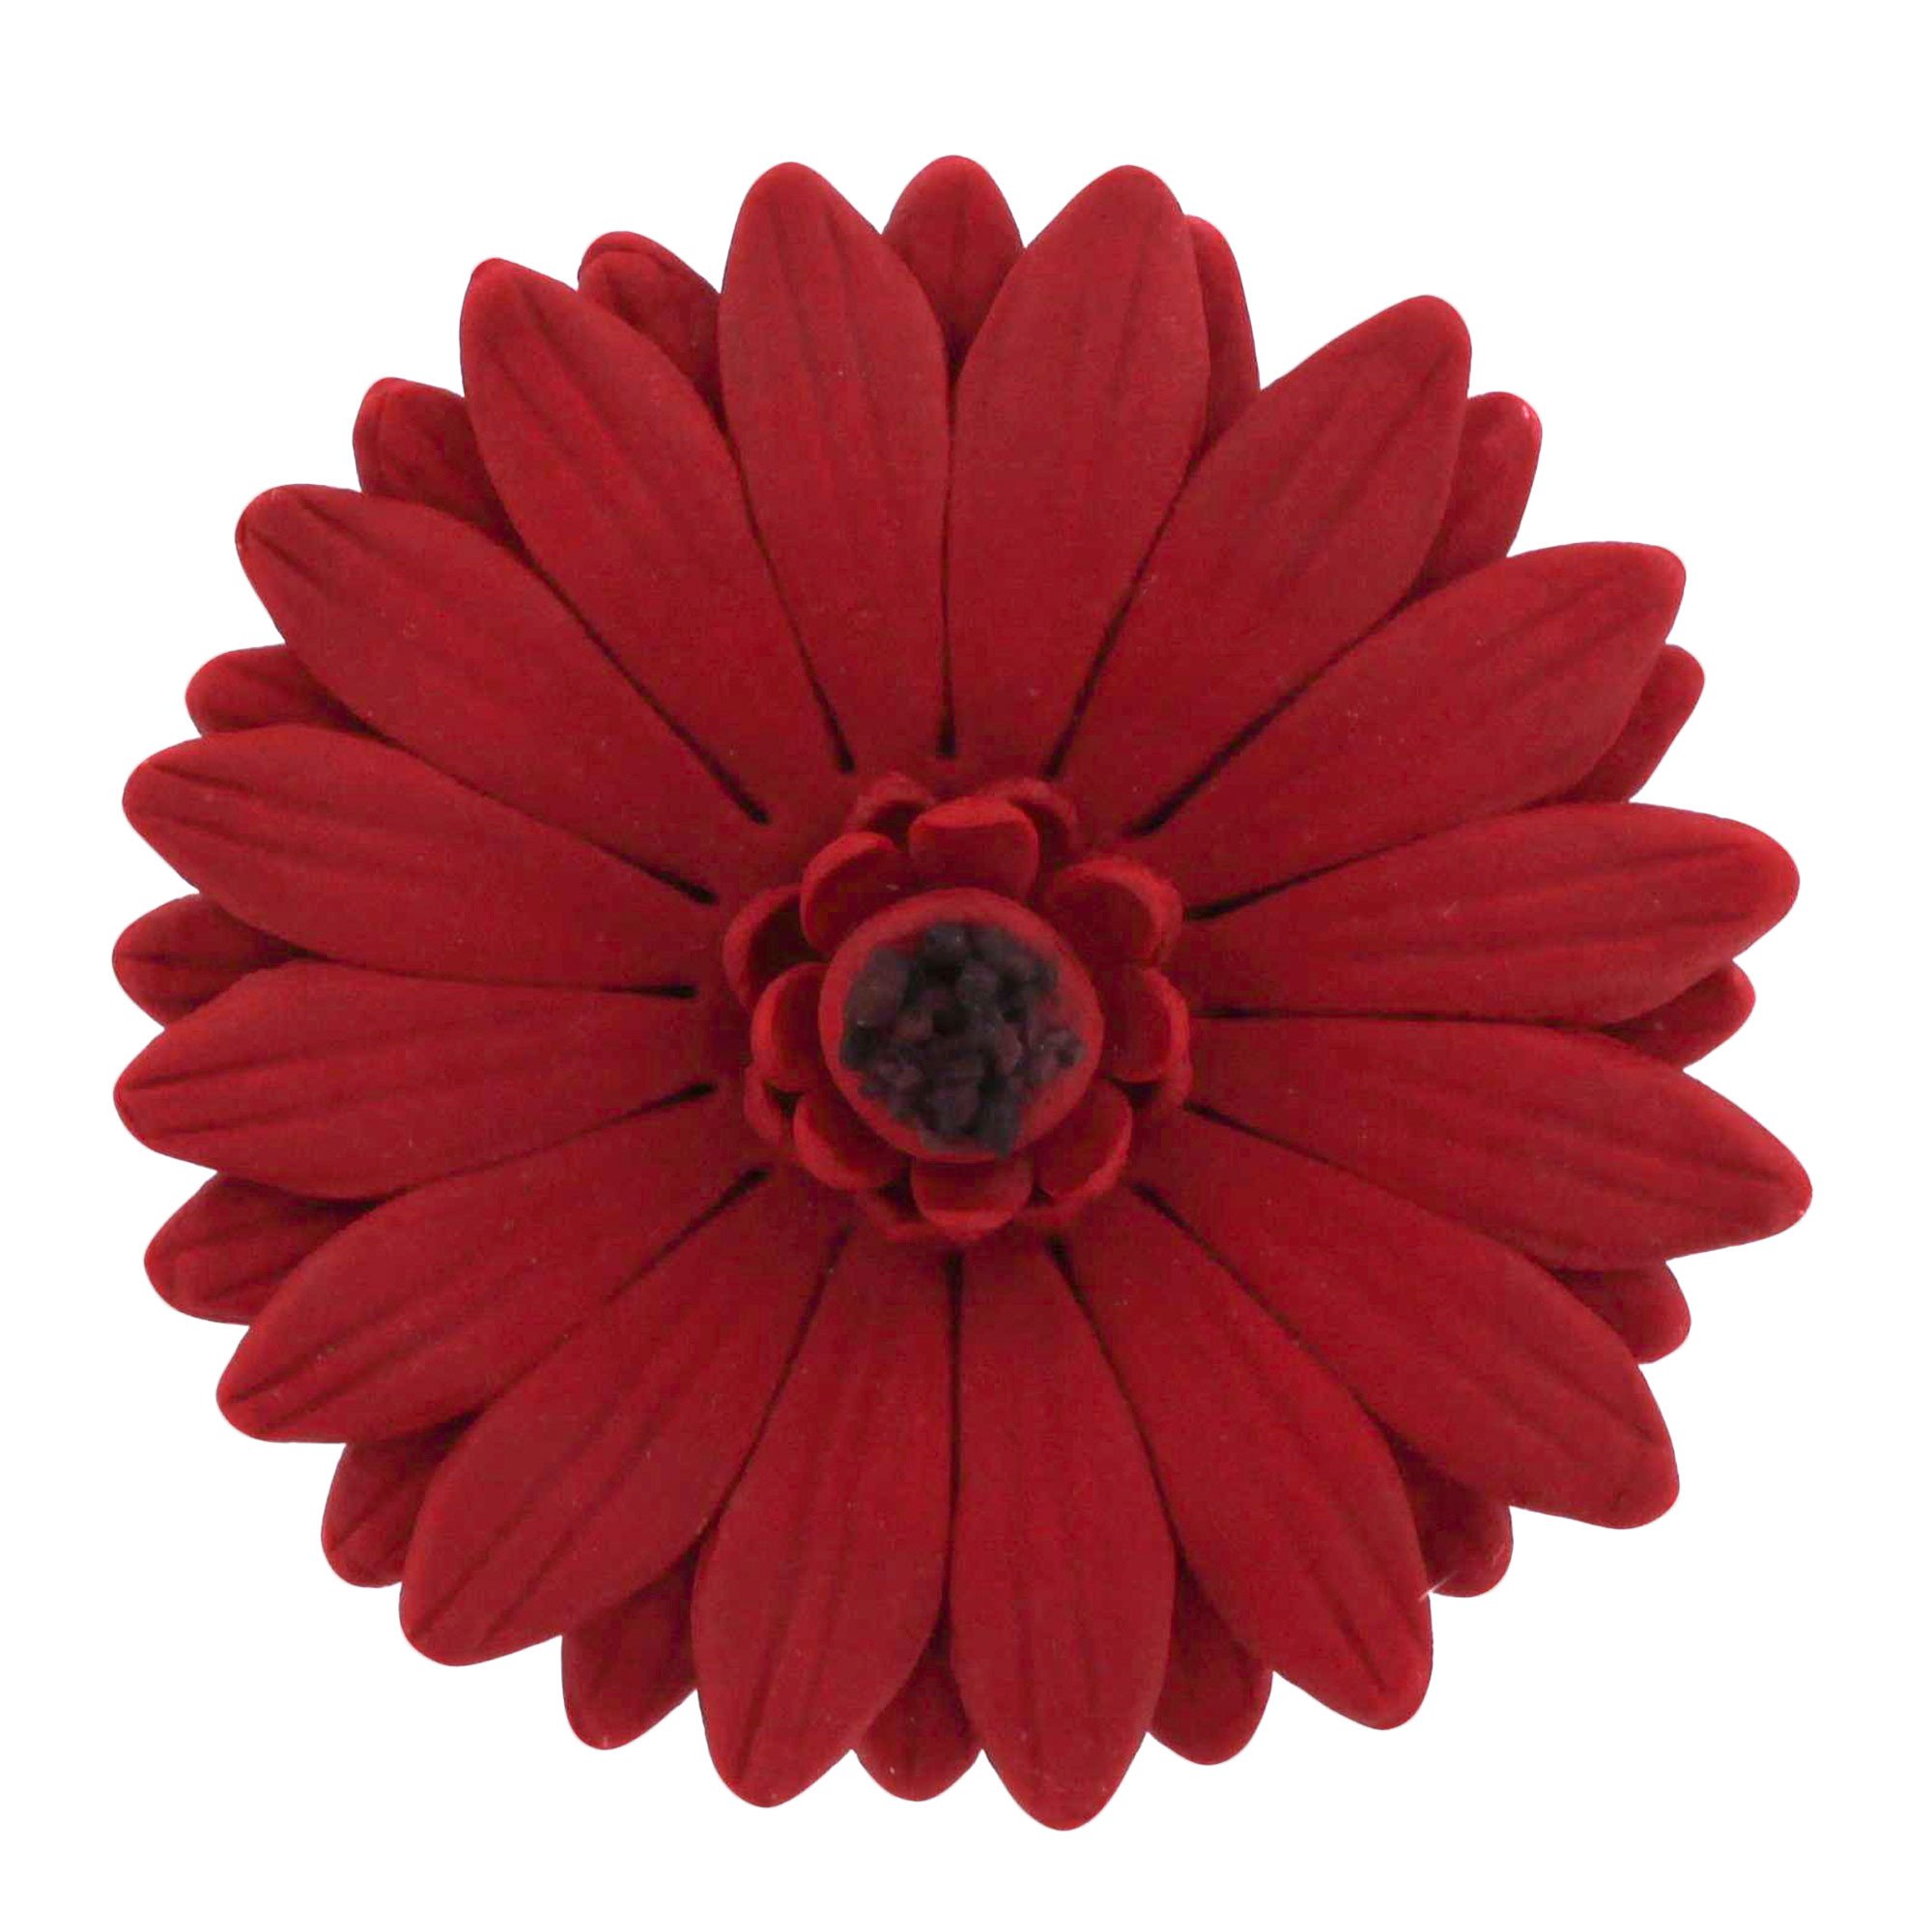 Gerbera Daisy Deep Red, 8 Count by Chef Alan Tetreault Daisies